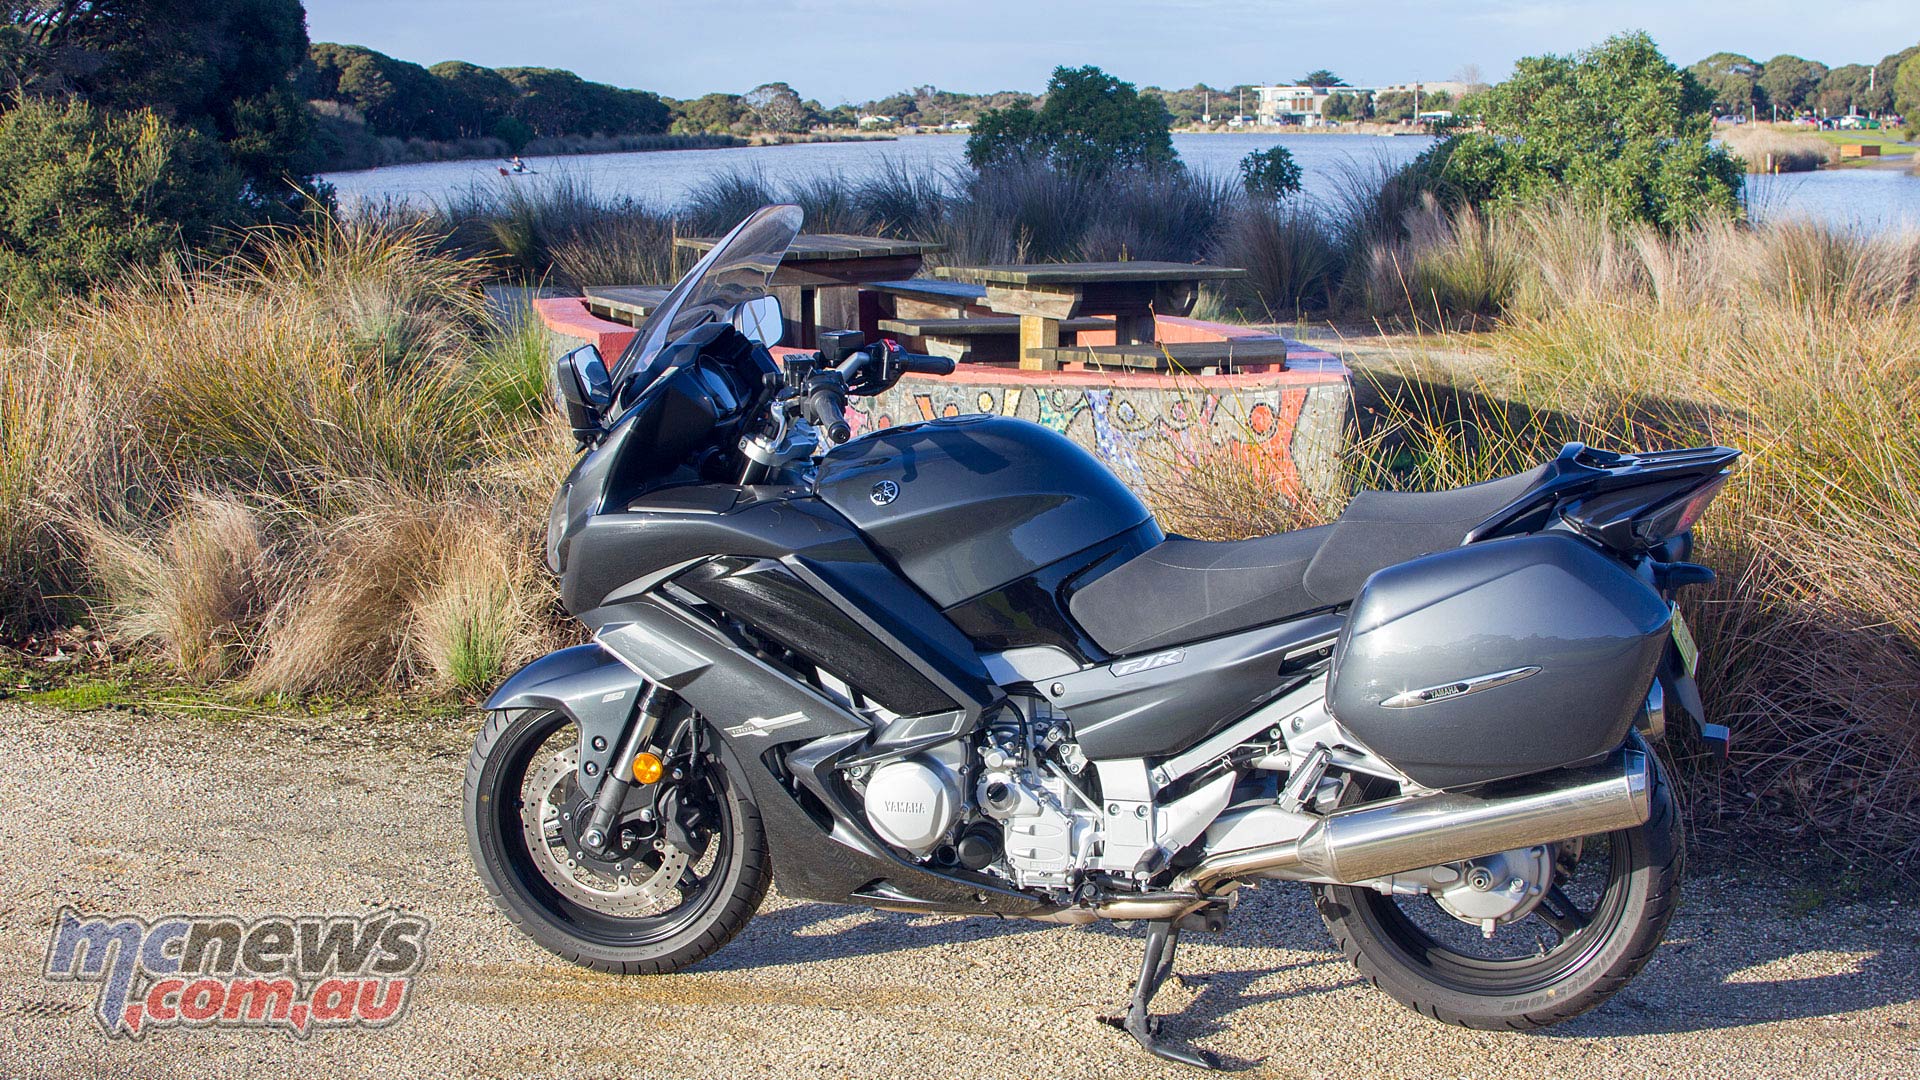 2019 Yamaha Fjr1300 Review Motorcycle Tests Motorcycle News Sport And Reviews